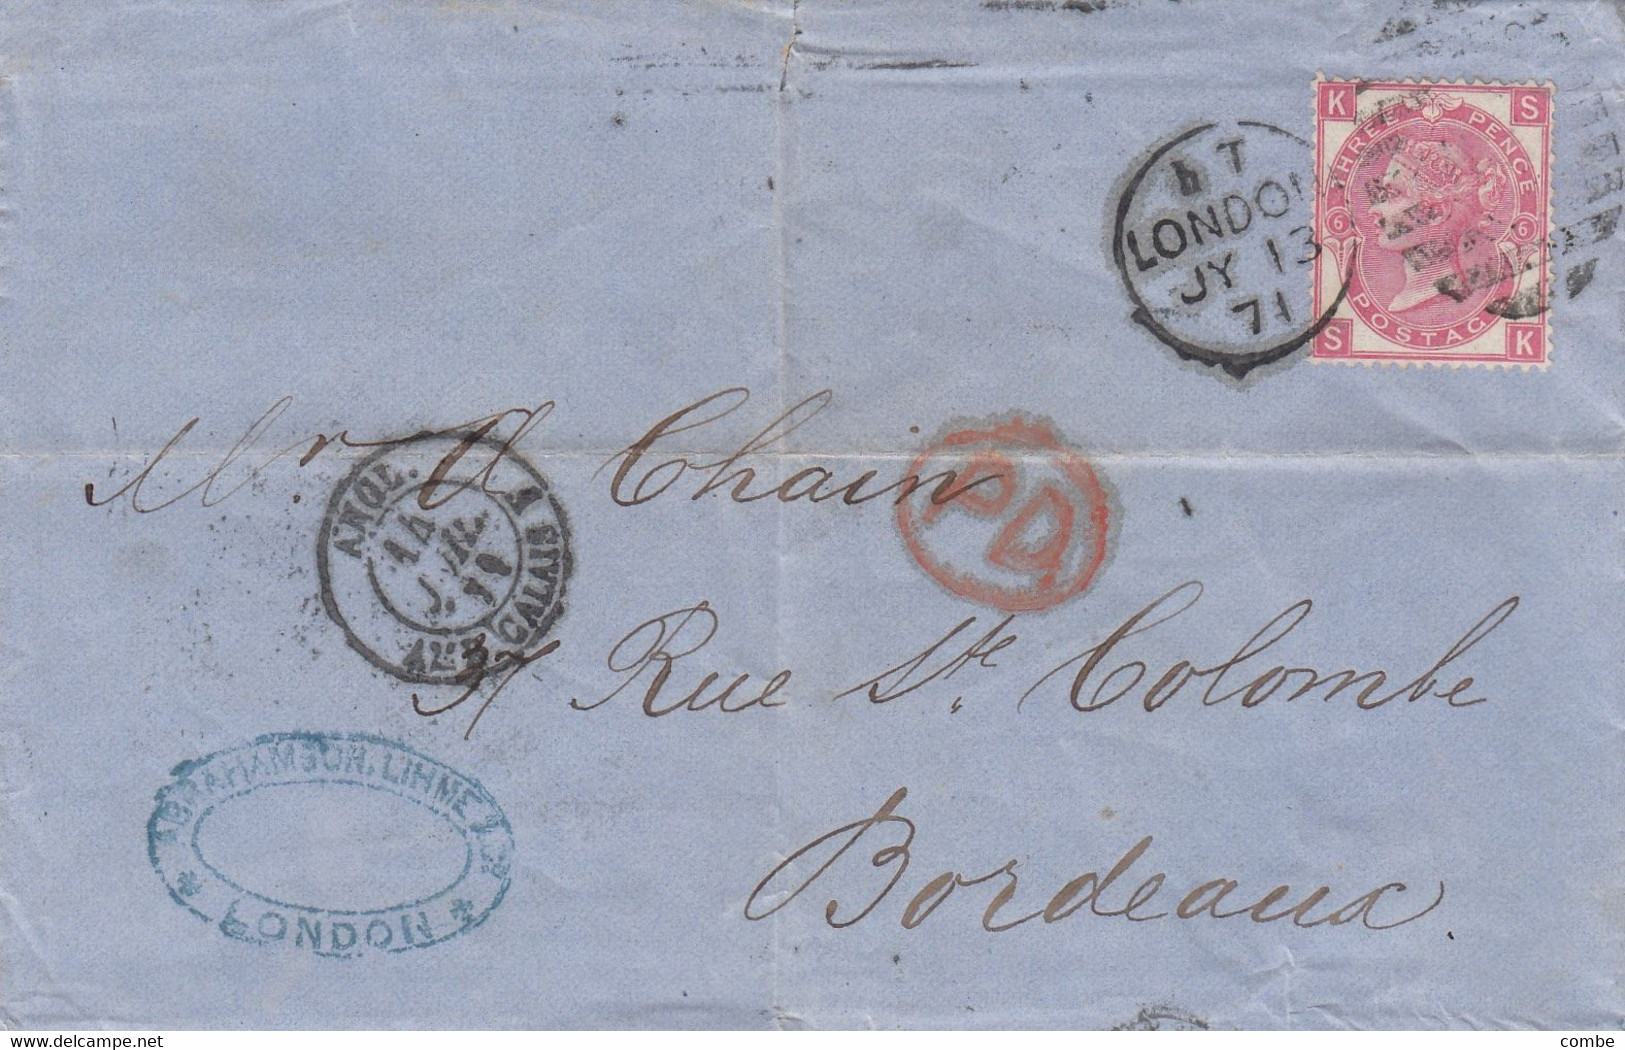 COVER. LONDON. 13 JY 71. TO BORDEAUX. VICTORIA THREE PENCE. KS. PLANCHE 6. PD. ANGL AMB CALAIS - Sin Clasificación